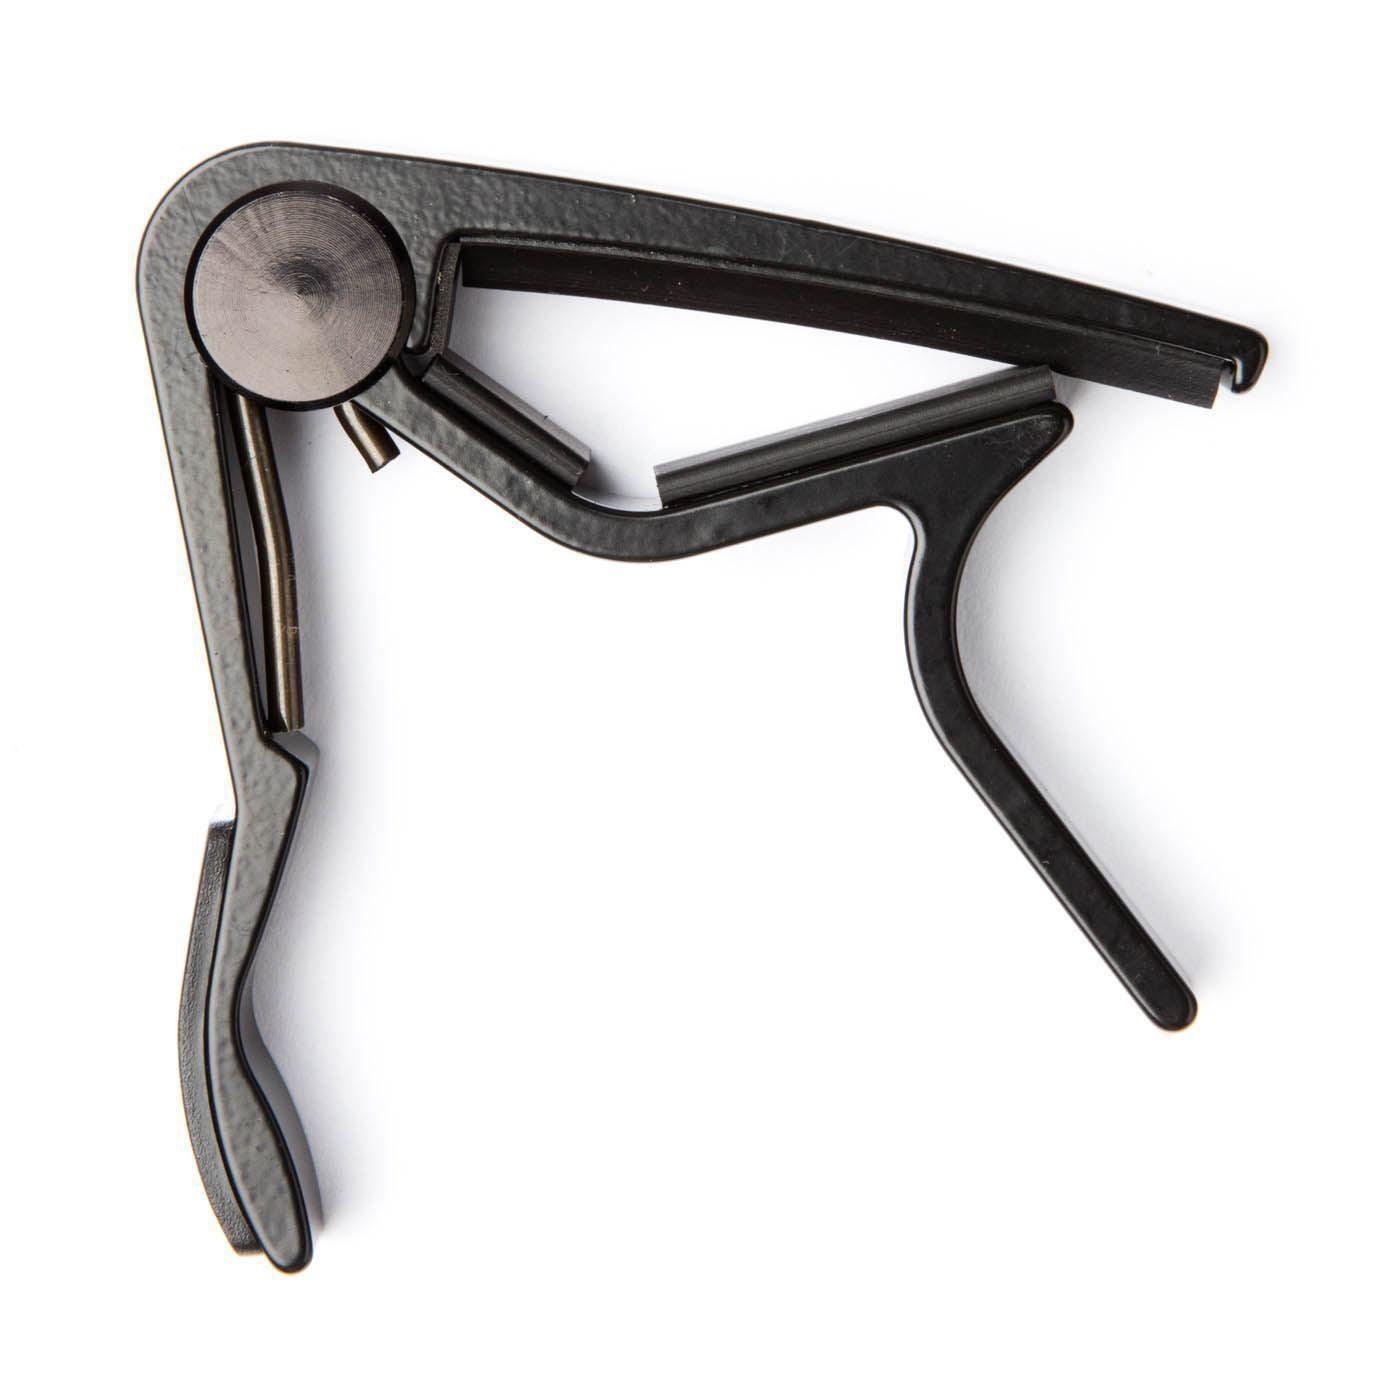 Capo Guitar Acoustic Curved Trigger Smoked Chrome - Capos by Jim Dunlop at Muso's Stuff